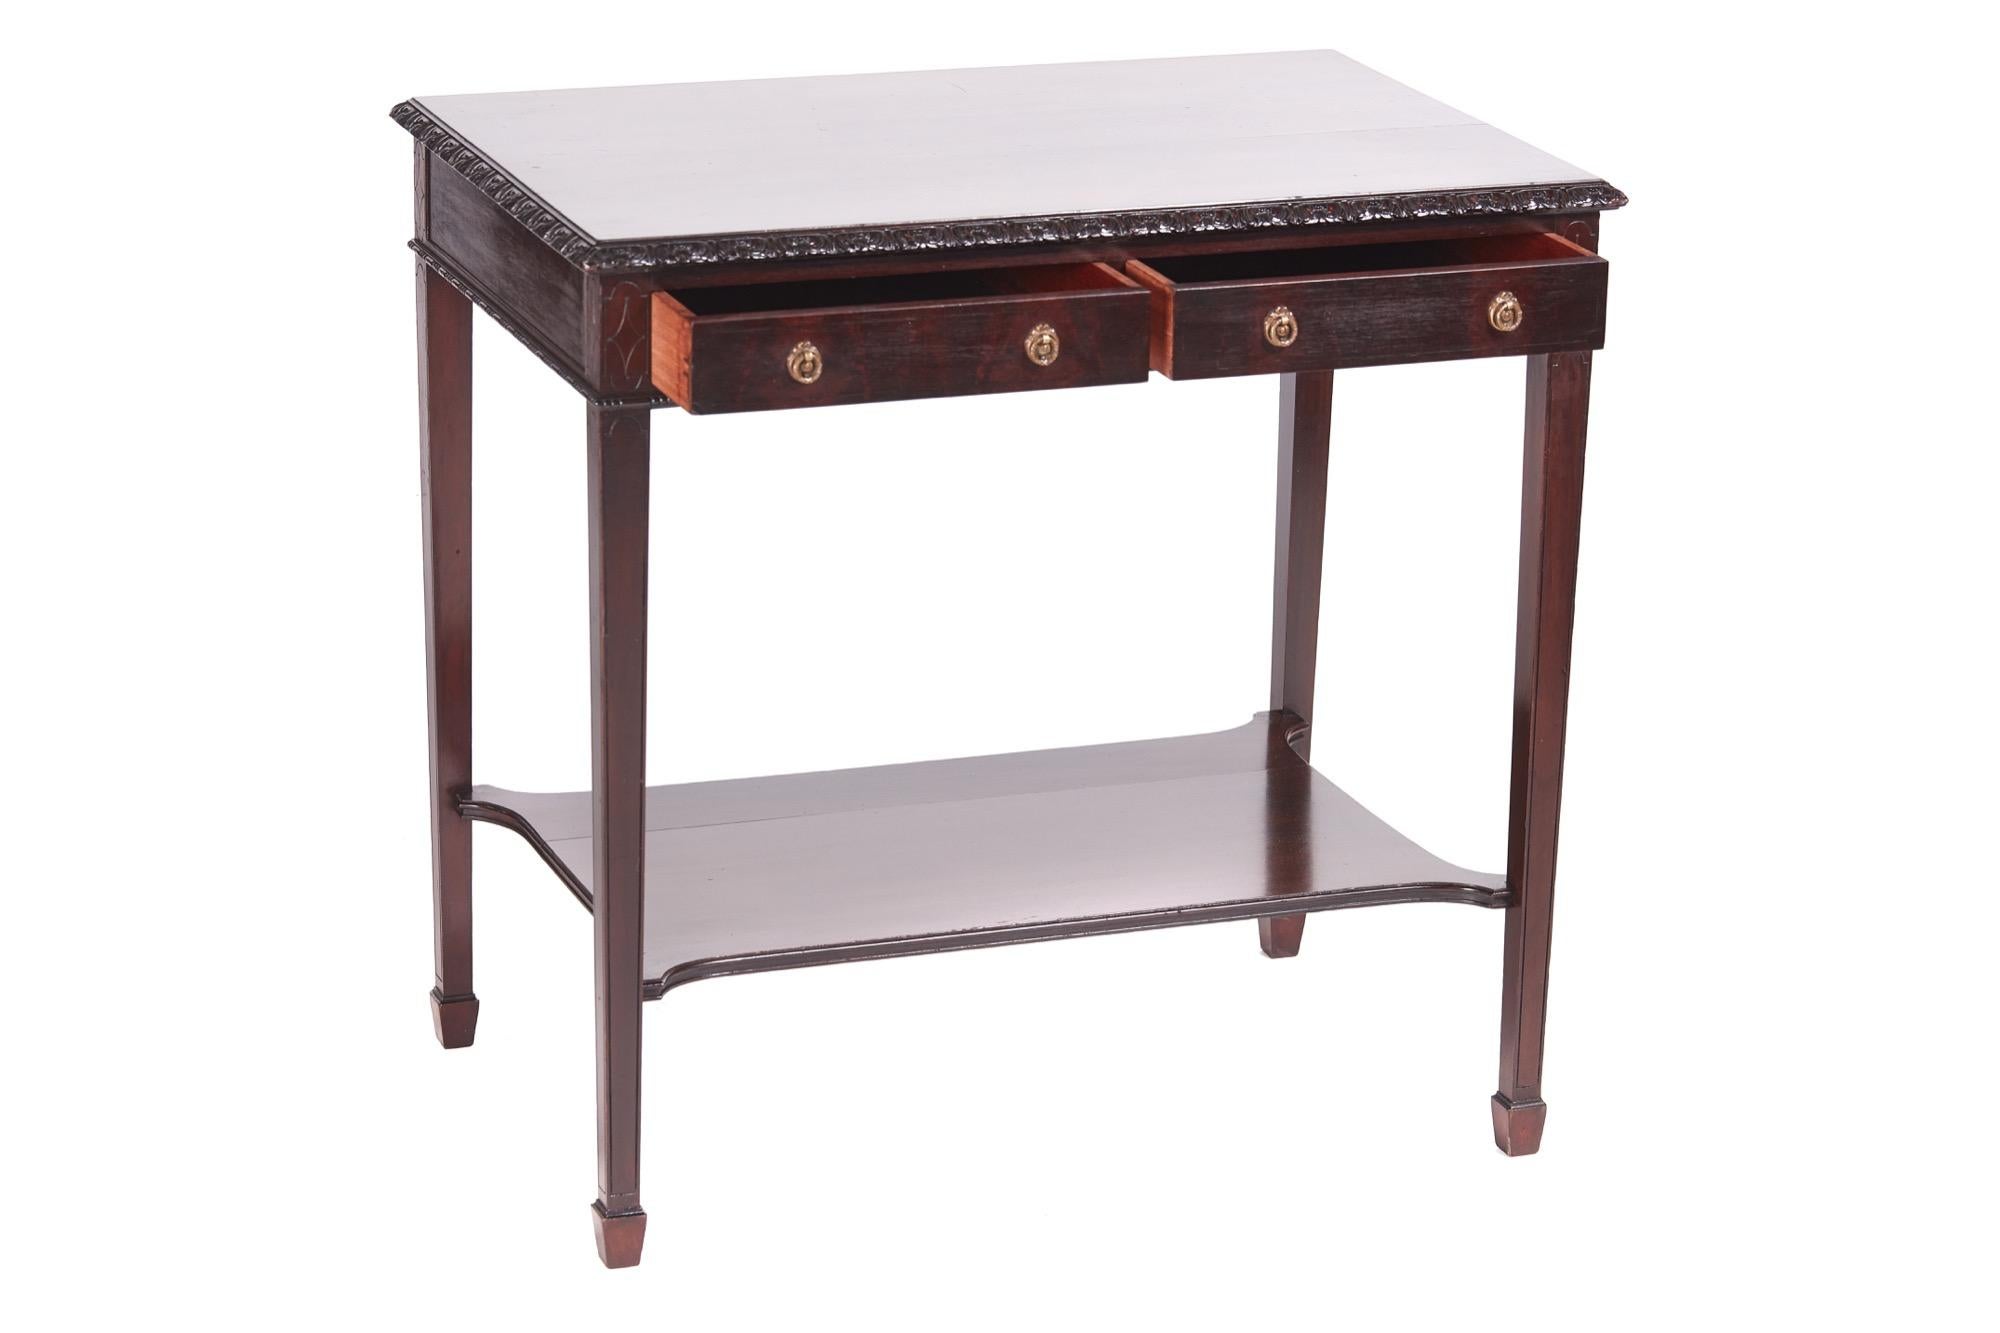 Quality Edwardian mahogany freestanding side / lamp table having a glorious mahogany top with a quality carved edge; two frieze drawers with original brass handles standing on four square tapering legs with spade feet united by a shaped